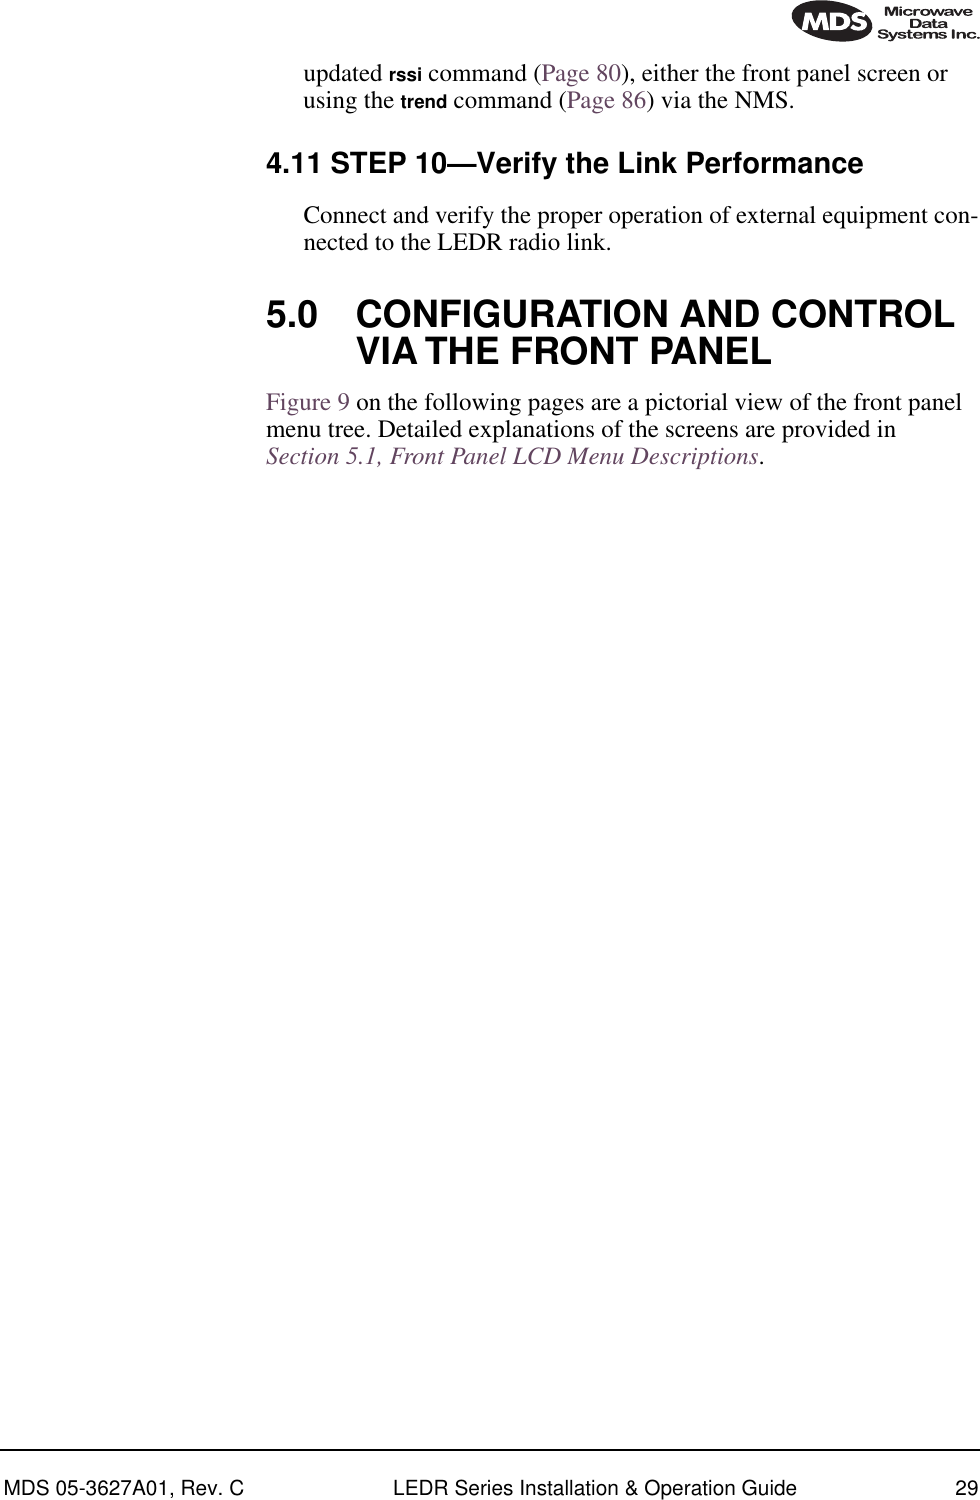 MDS 05-3627A01, Rev. C LEDR Series Installation &amp; Operation Guide 29updated rssi command (Page 80), either the front panel screen or using the trend command (Page 86) via the NMS.4.11 STEP 10—Verify the Link PerformanceConnect and verify the proper operation of external equipment con-nected to the LEDR radio link.5.0 CONFIGURATION AND CONTROL VIA THE FRONT PANELFigure 9 on the following pages are a pictorial view of the front panel menu tree. Detailed explanations of the screens are provided in Section 5.1, Front Panel LCD Menu Descriptions.      